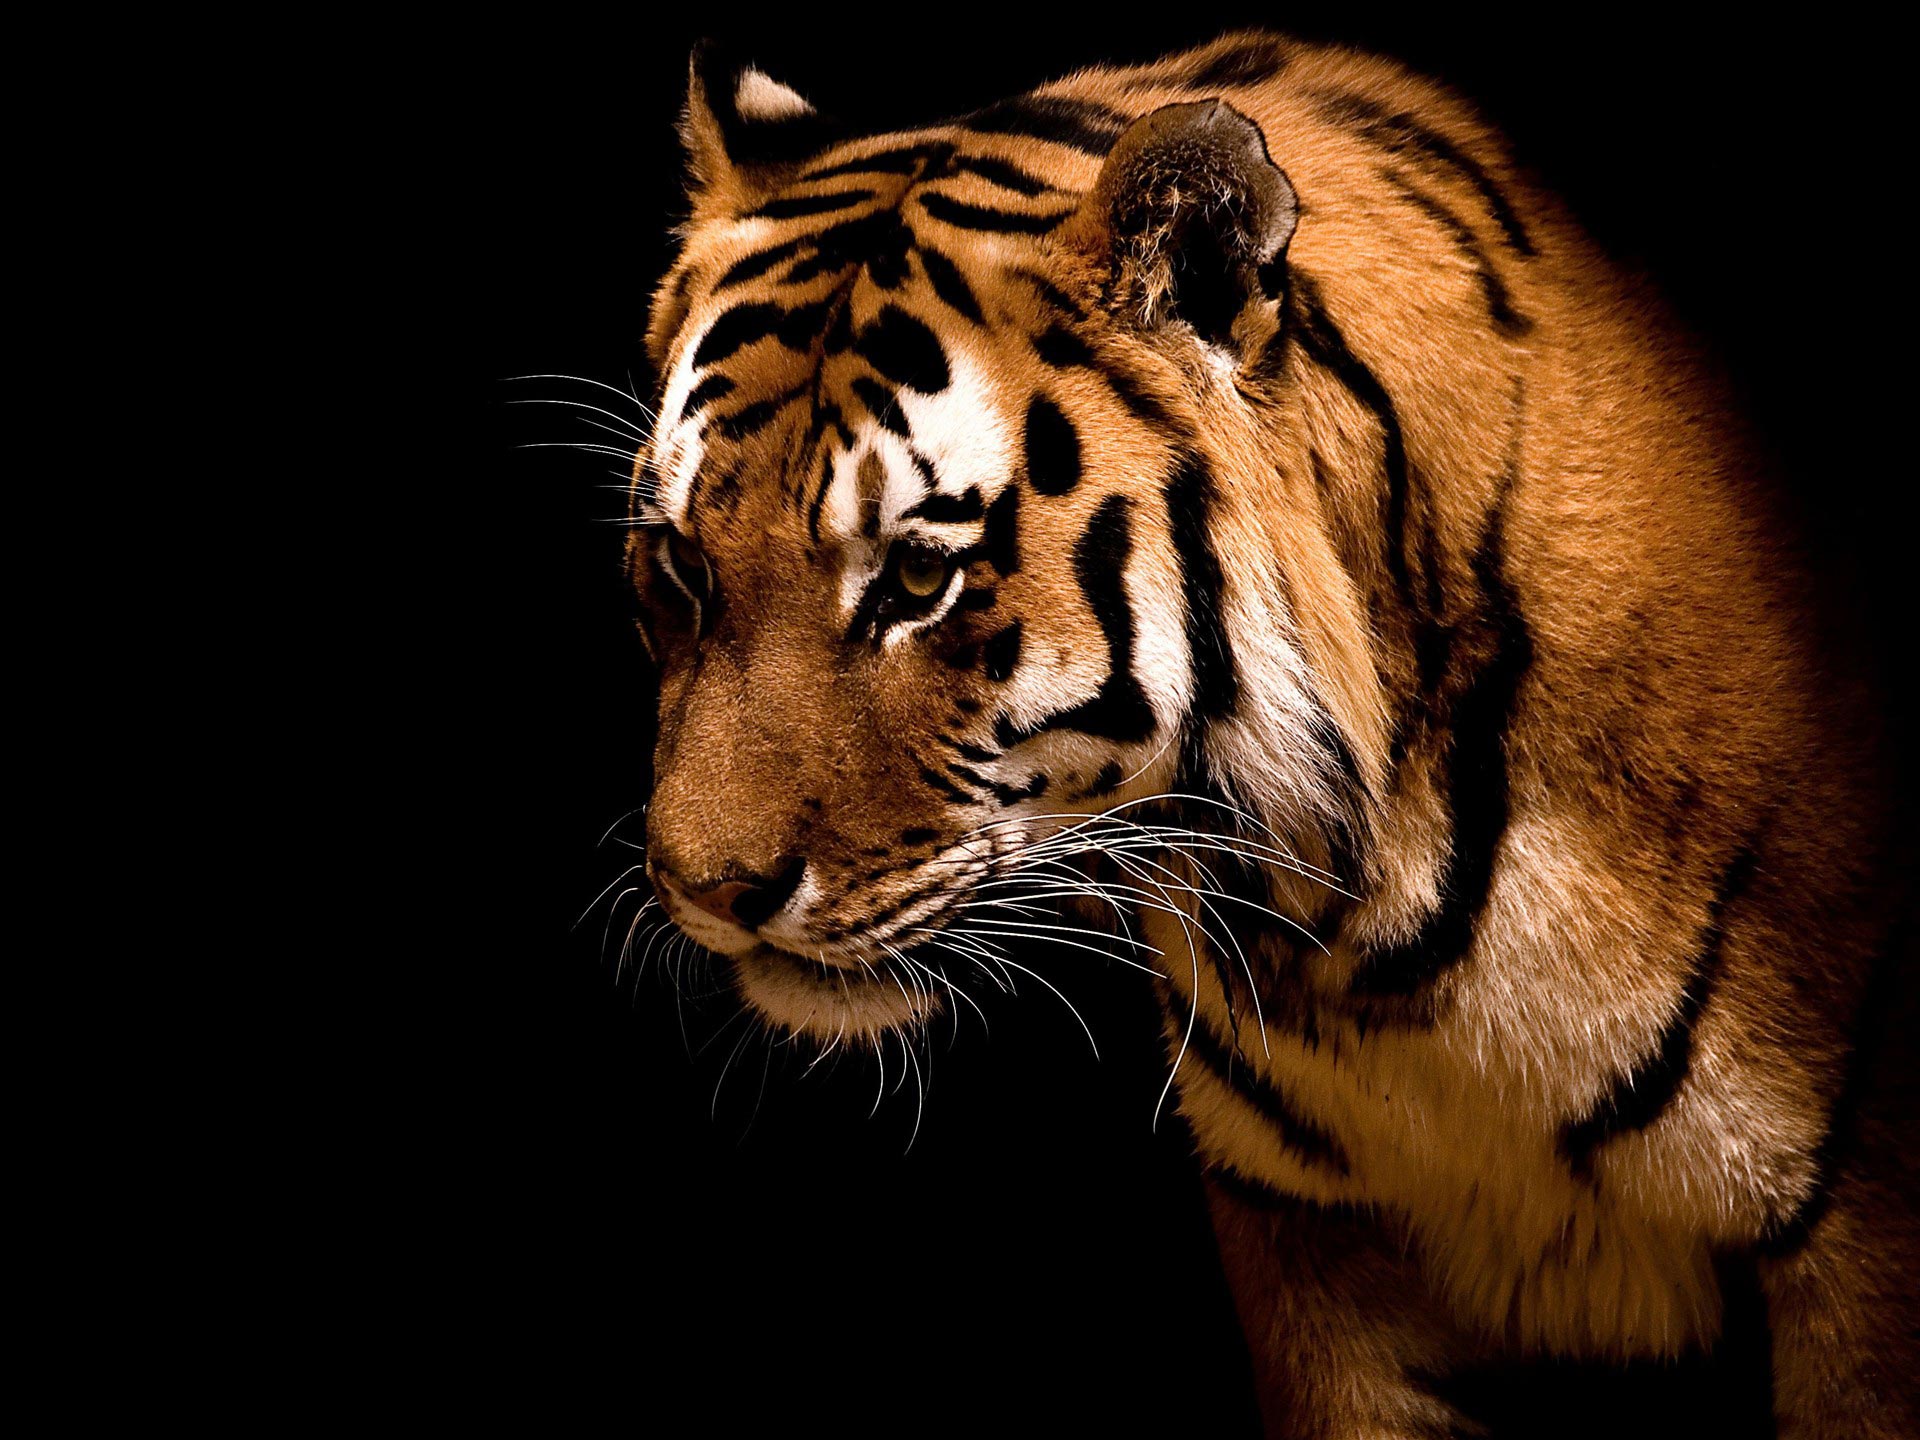 Tiger wallpapers hd free download